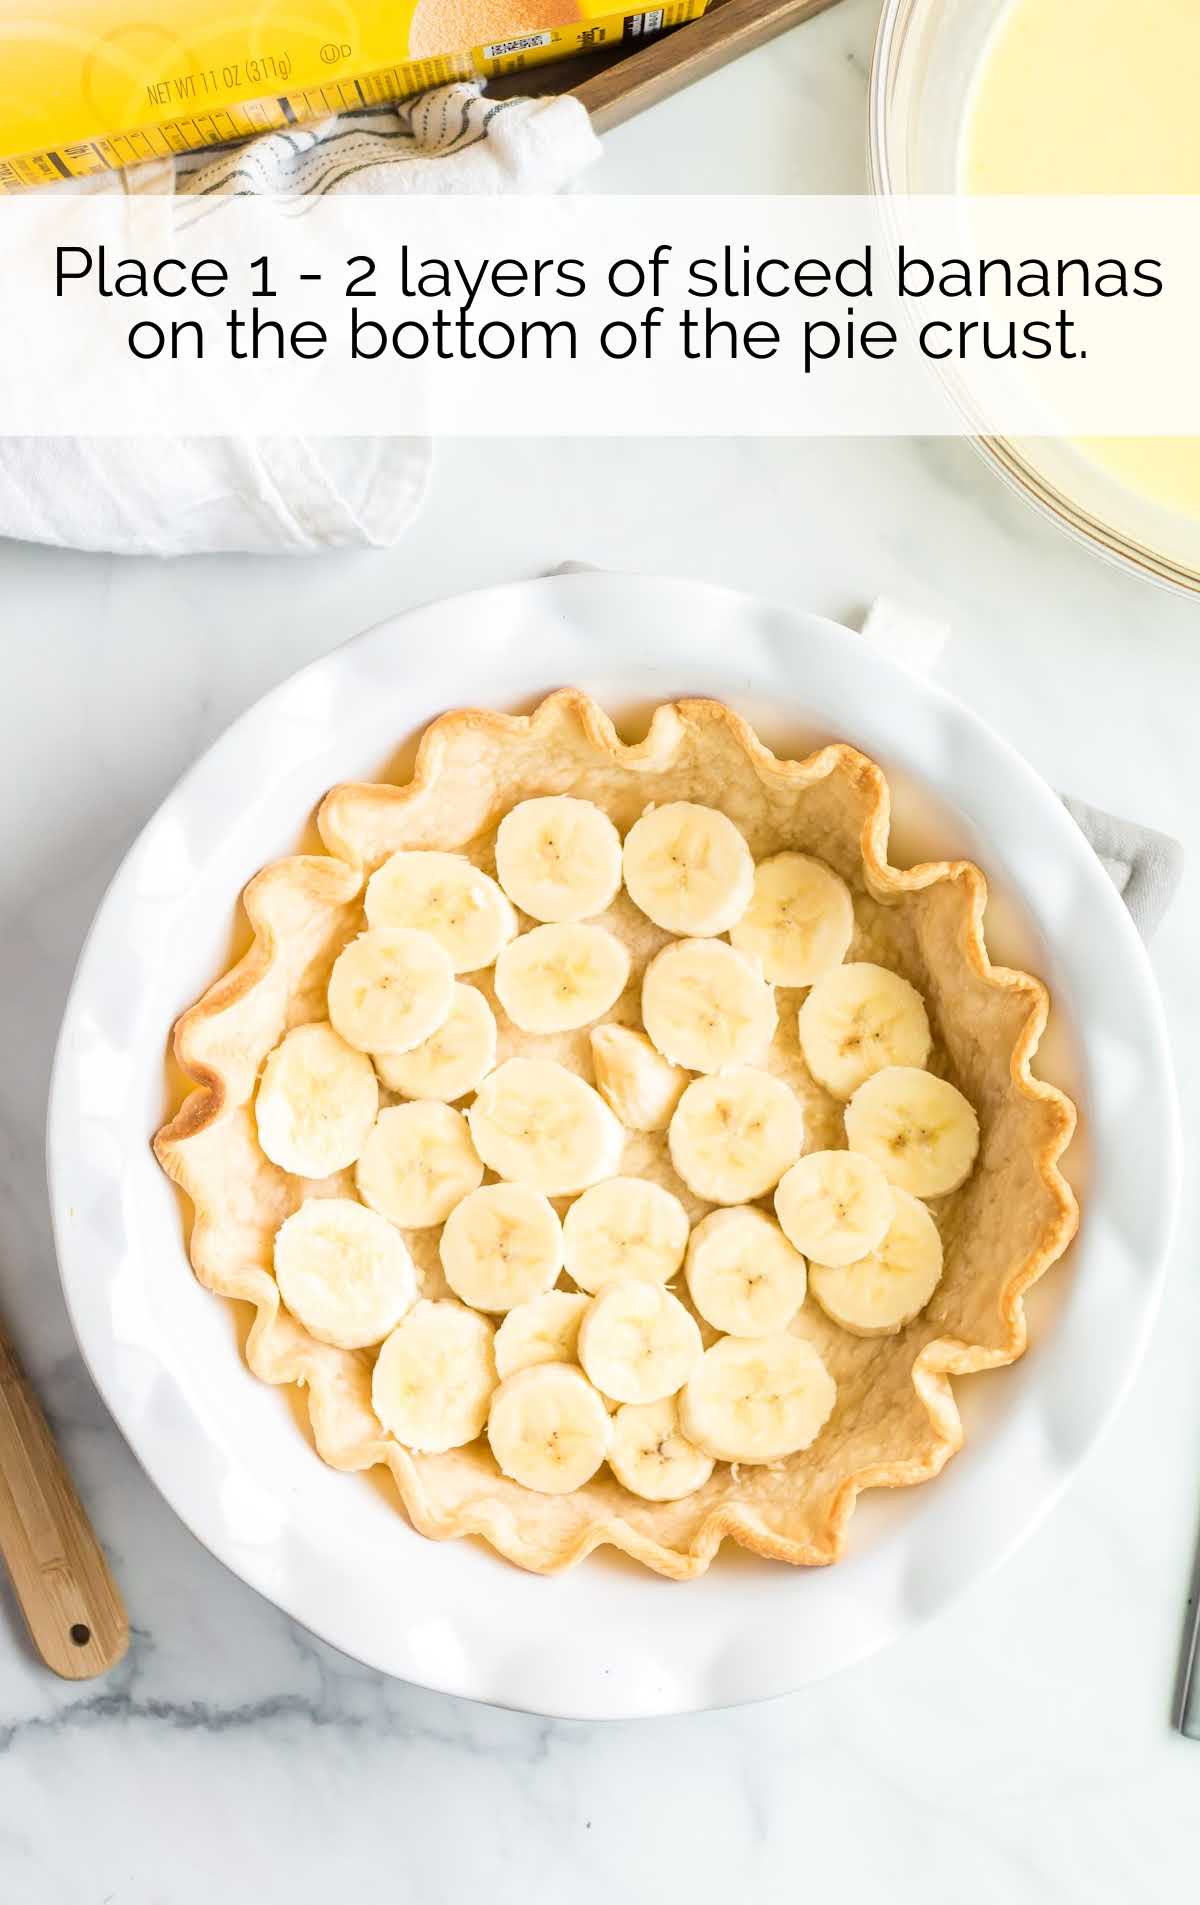 sliced banana added to the pie crust